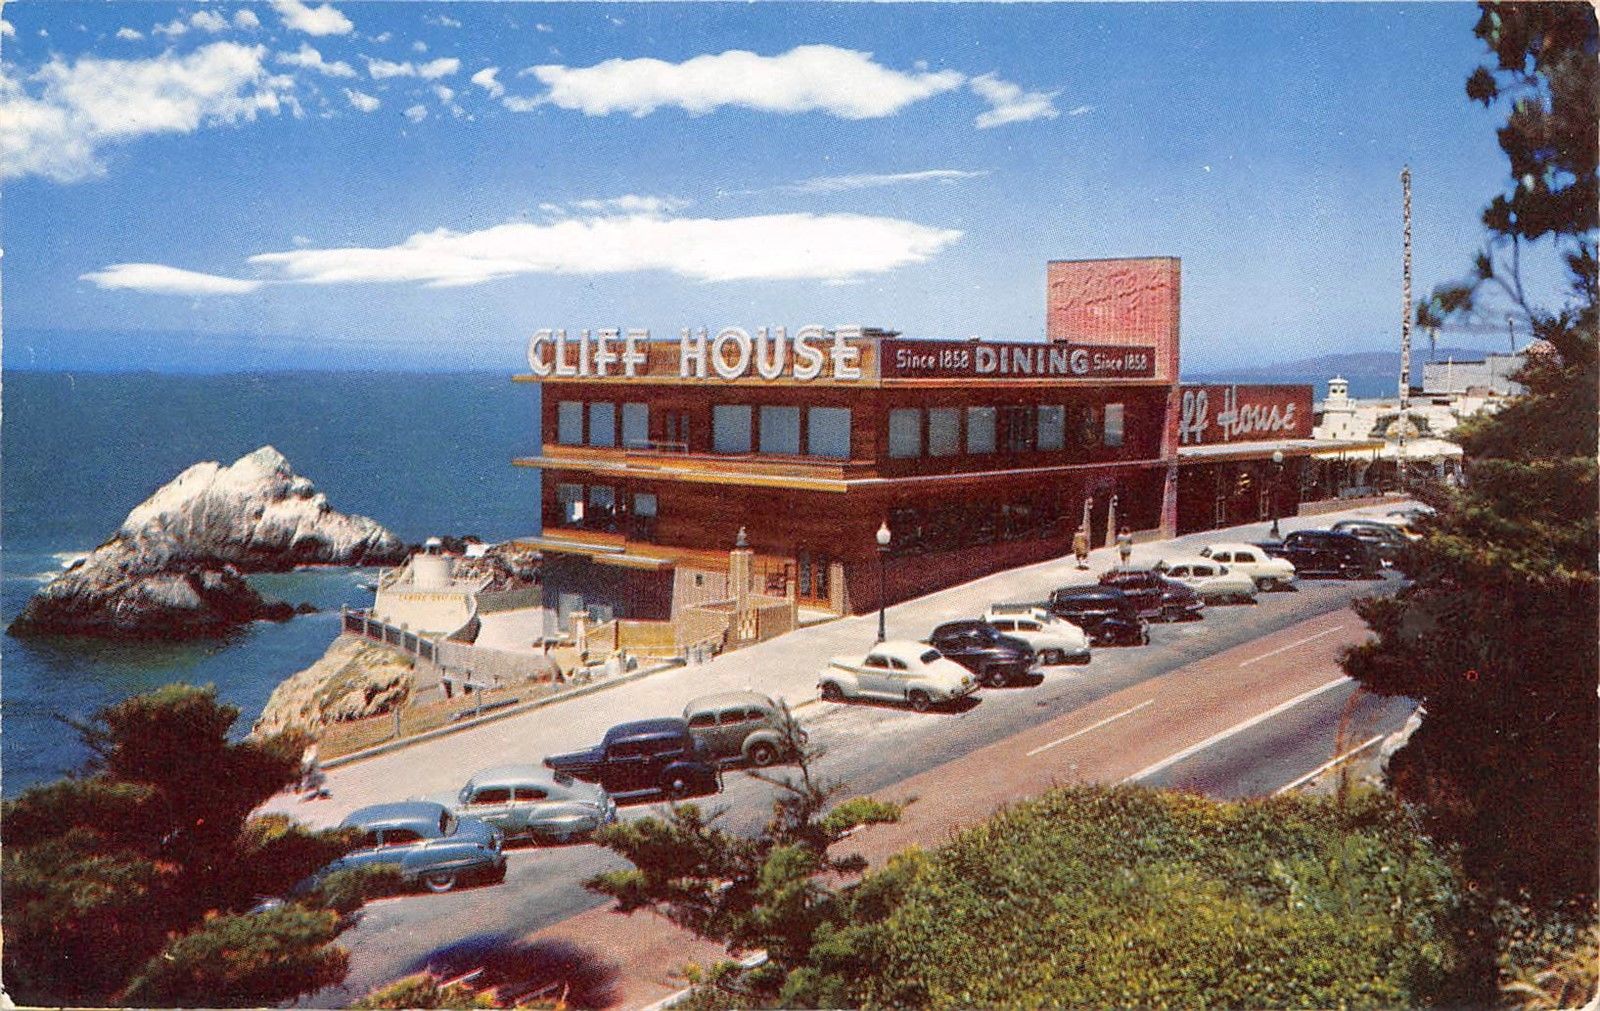 postcard-ca-san-francisco-cliff-house-restaurant-old-cars-aerial-view-unmailed-328ad604f49e4235e968eb21bb0f4b2f